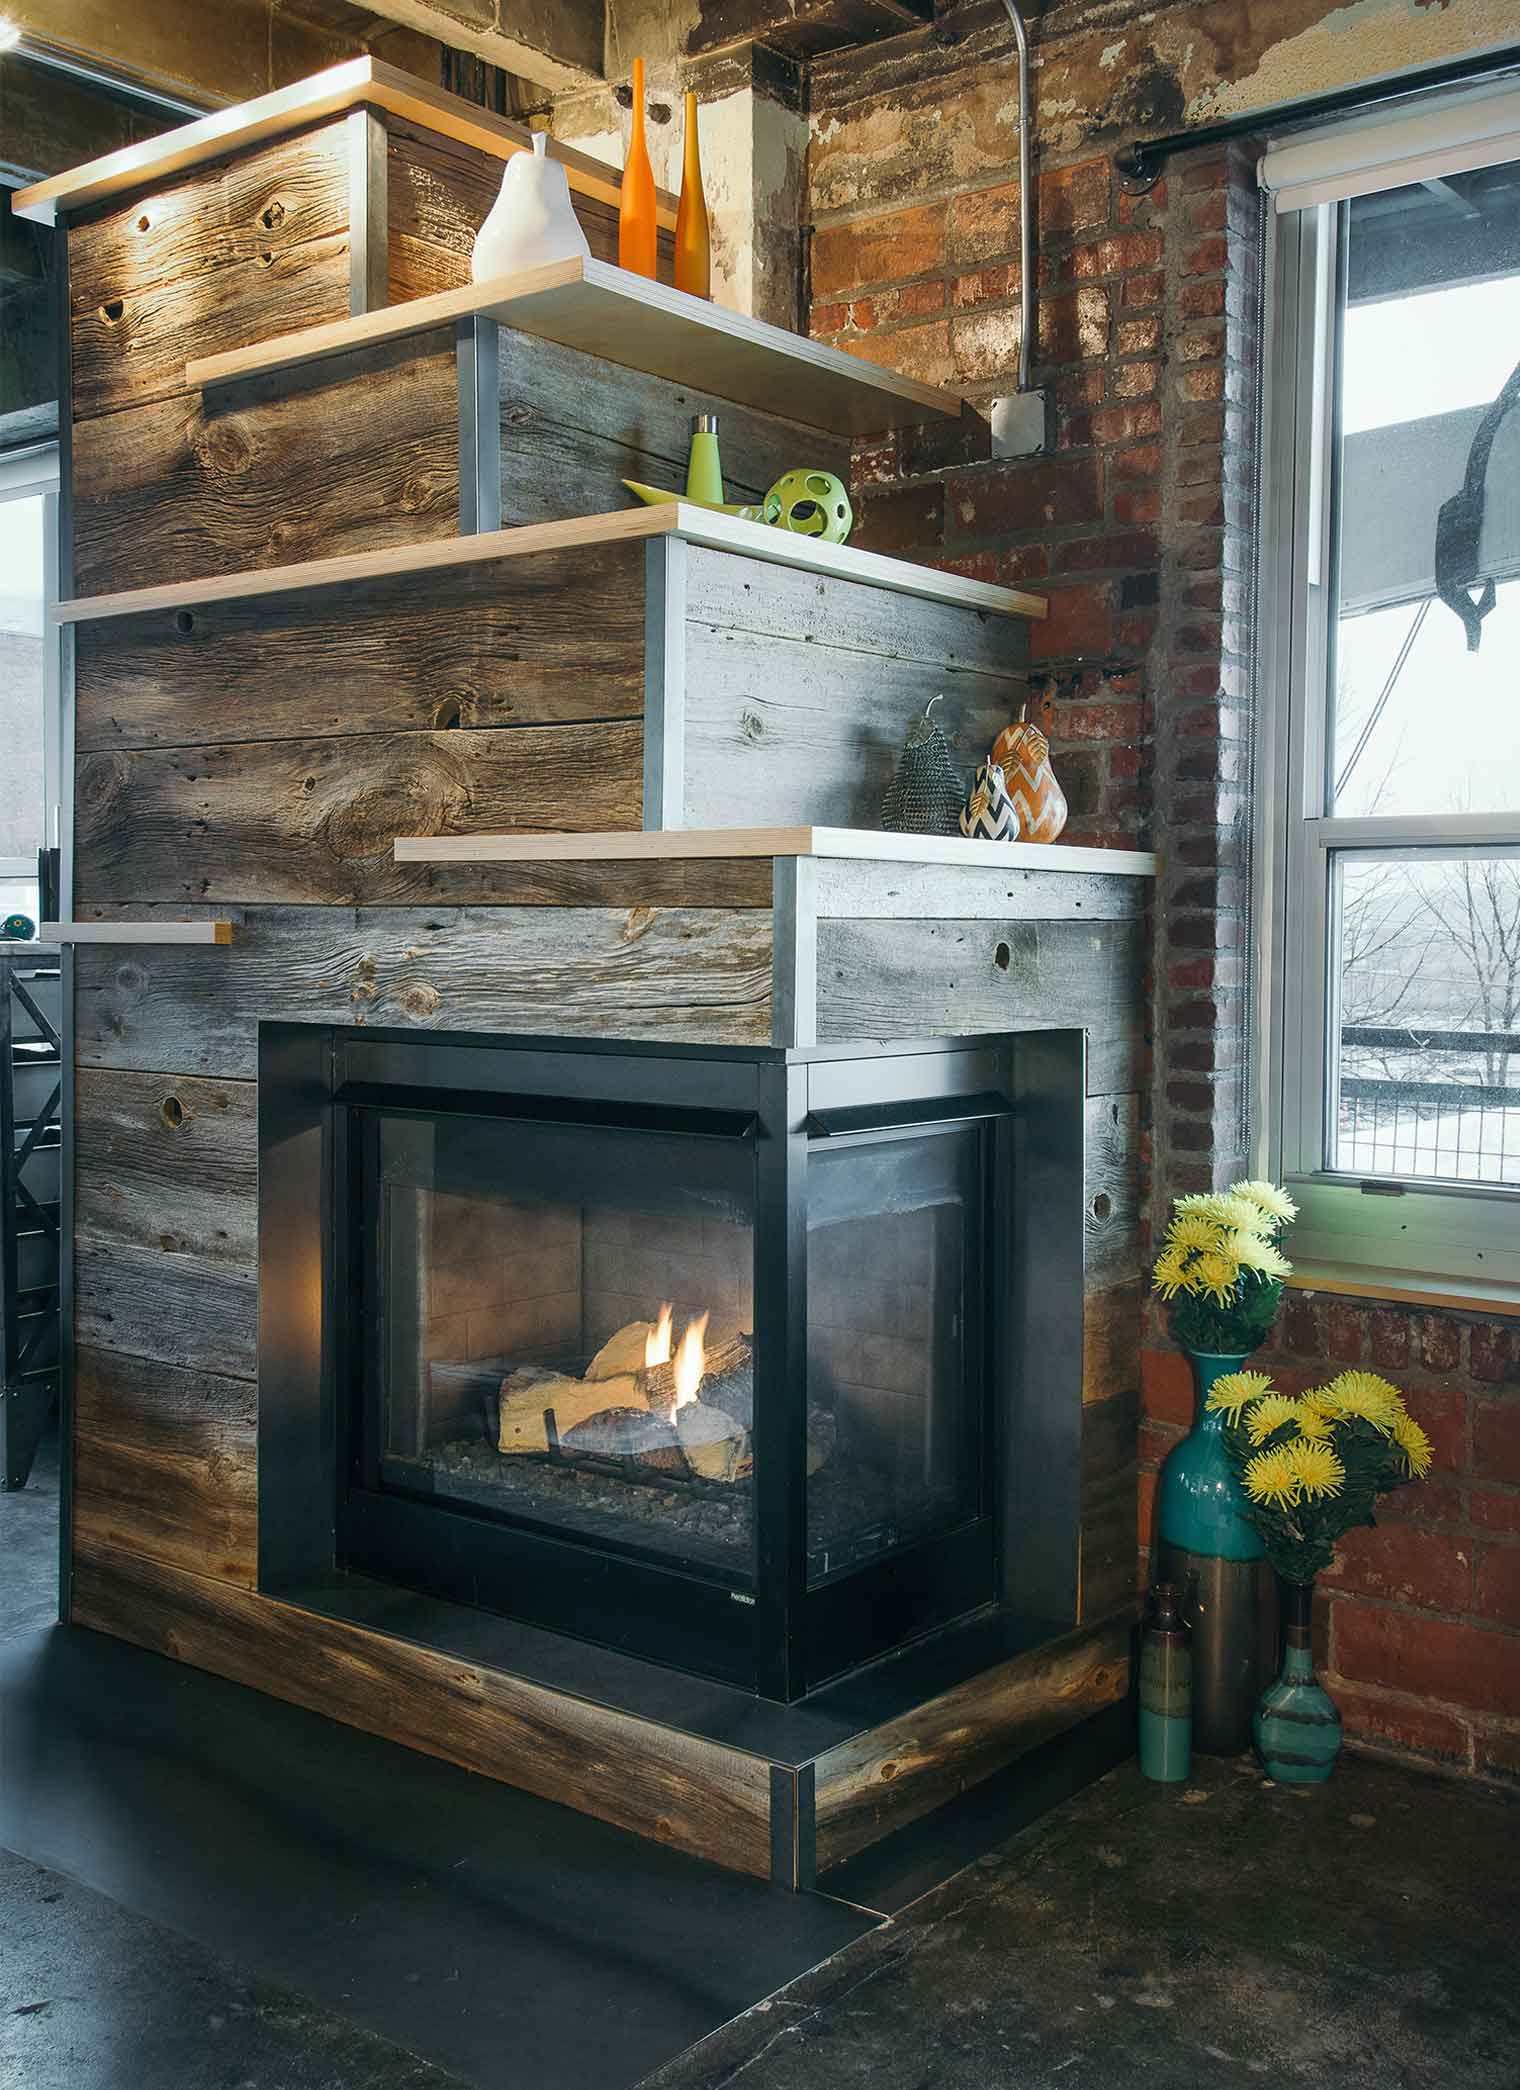 Baltic birch shelving in unique design on salvage barn wood fireplace in downtown Des Moines loft designed by Silent Rivers Design+Build